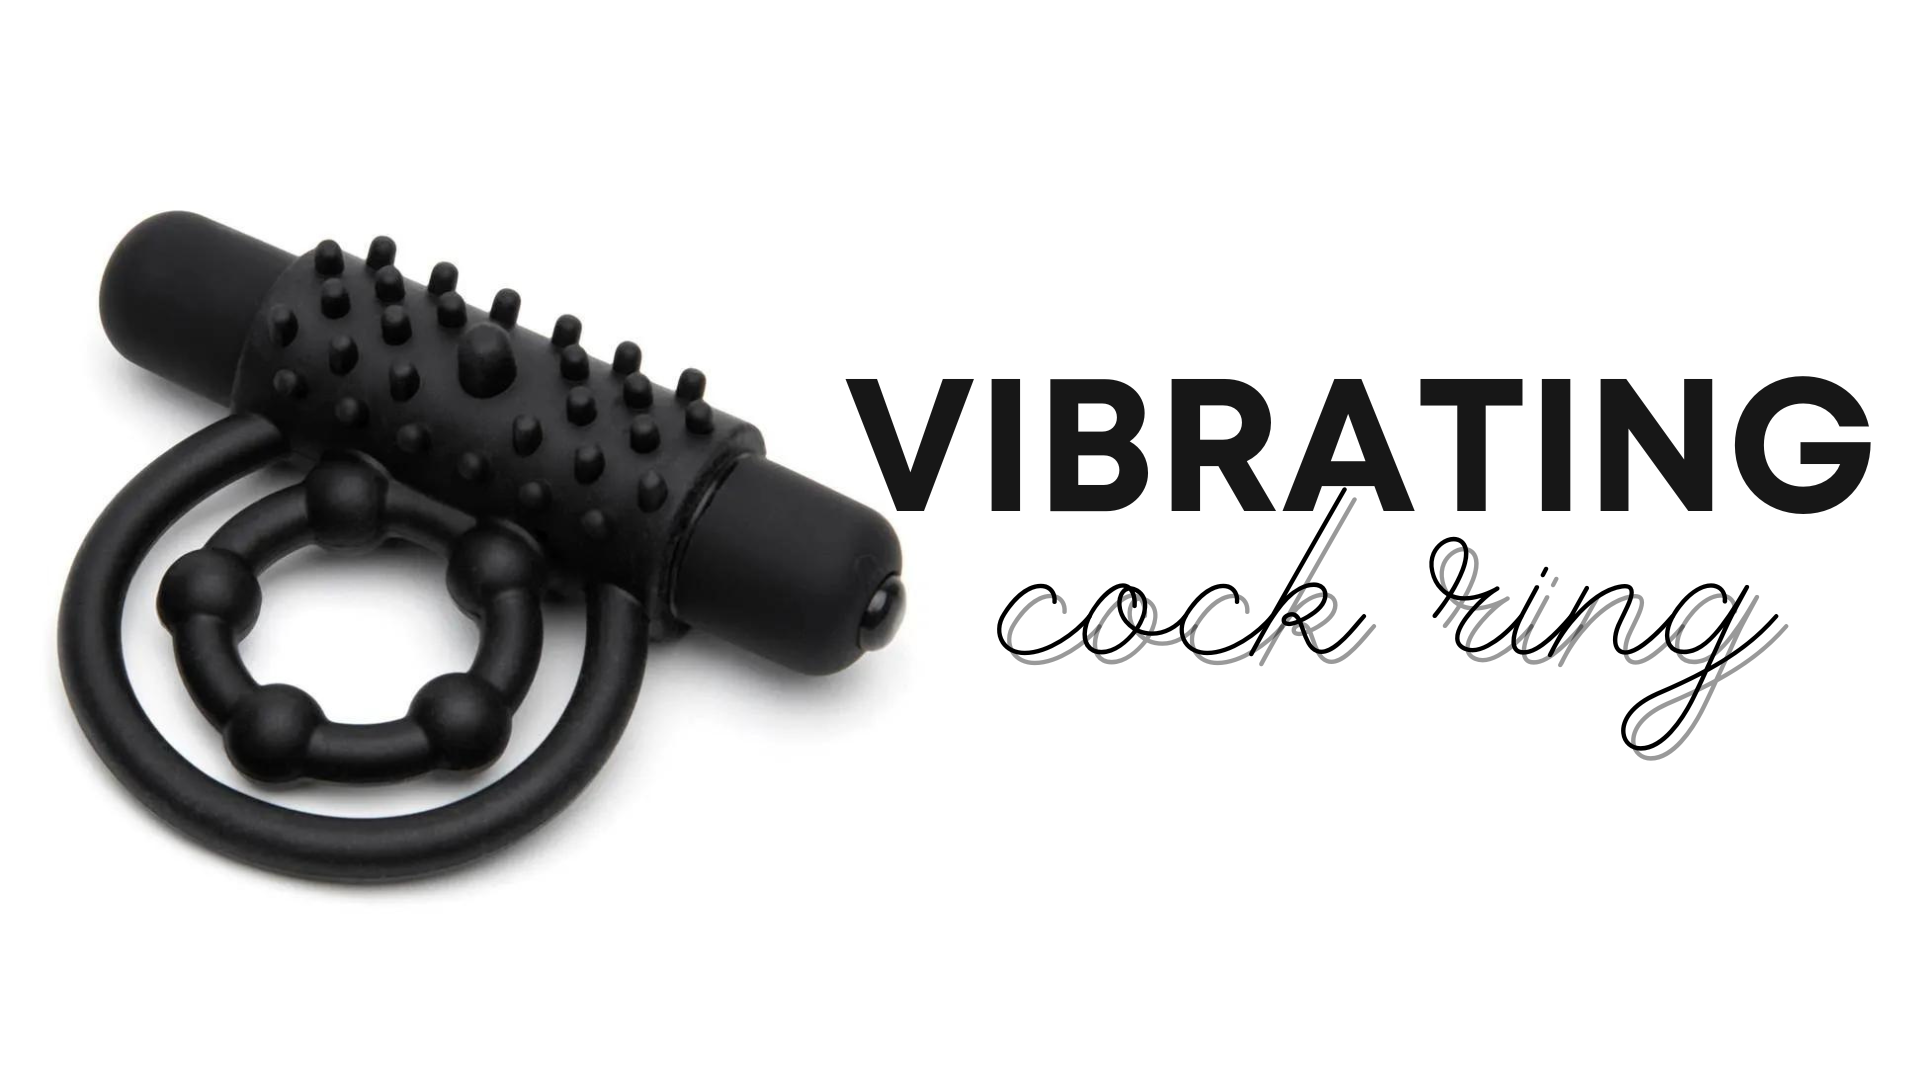 A black Vibrating Cock Ring with words "Vibrating Cock Ring" on the right side